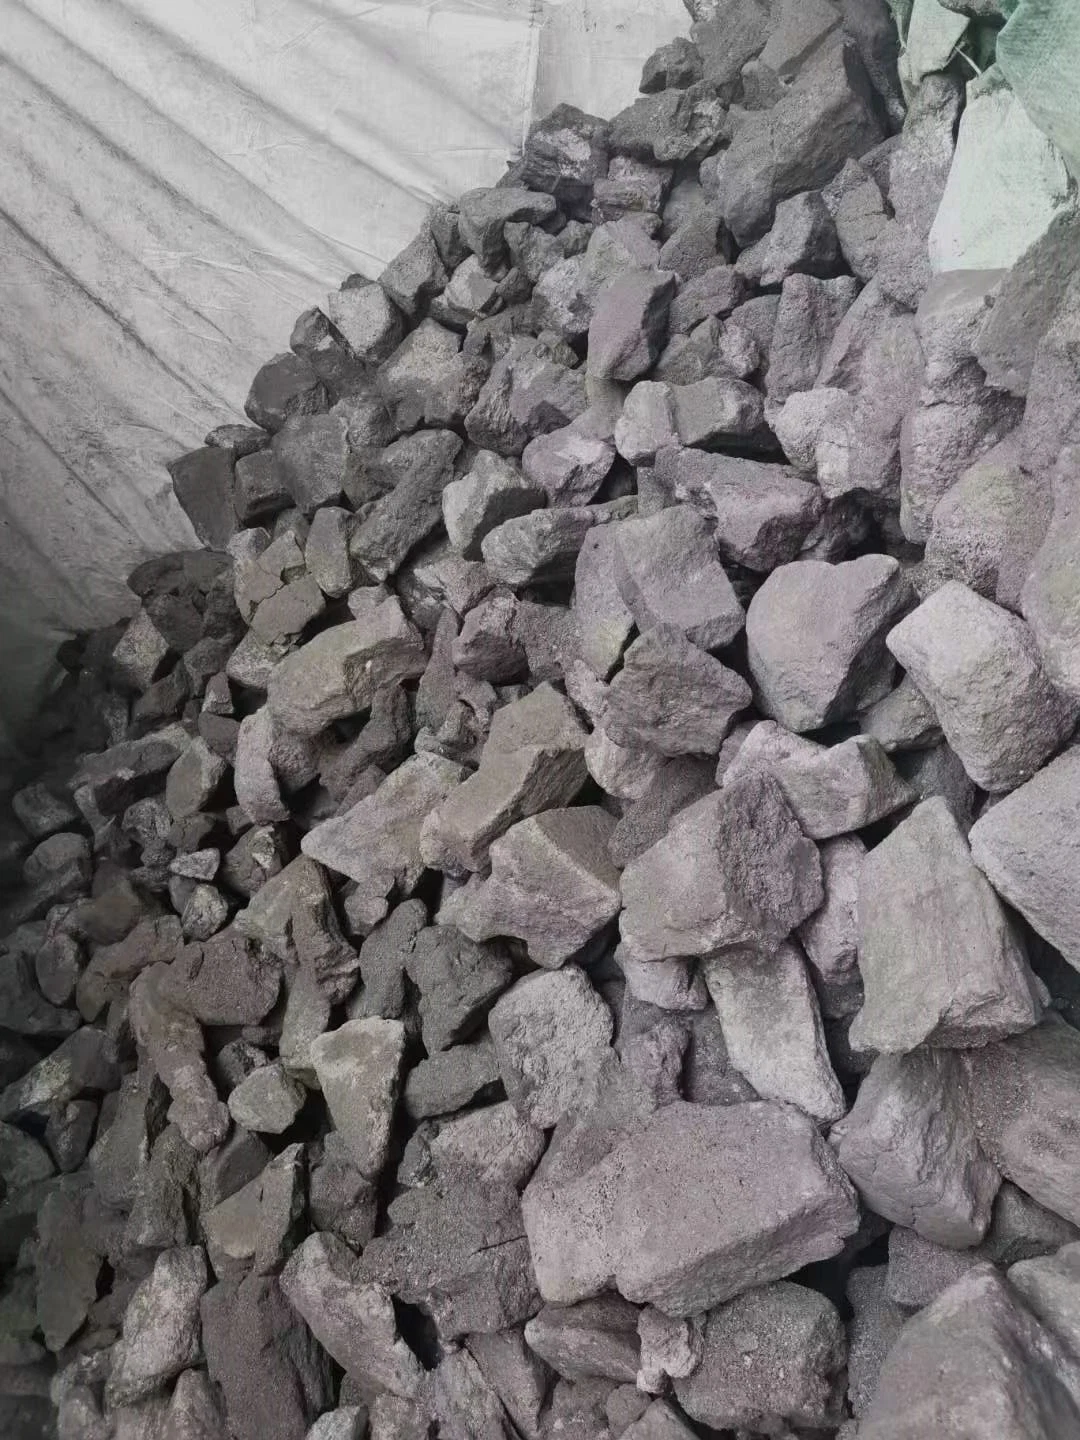 Metallurgical Coke Coal for Industrial-Grade Blast Furnace Injection of High-Fixed Steelmaking